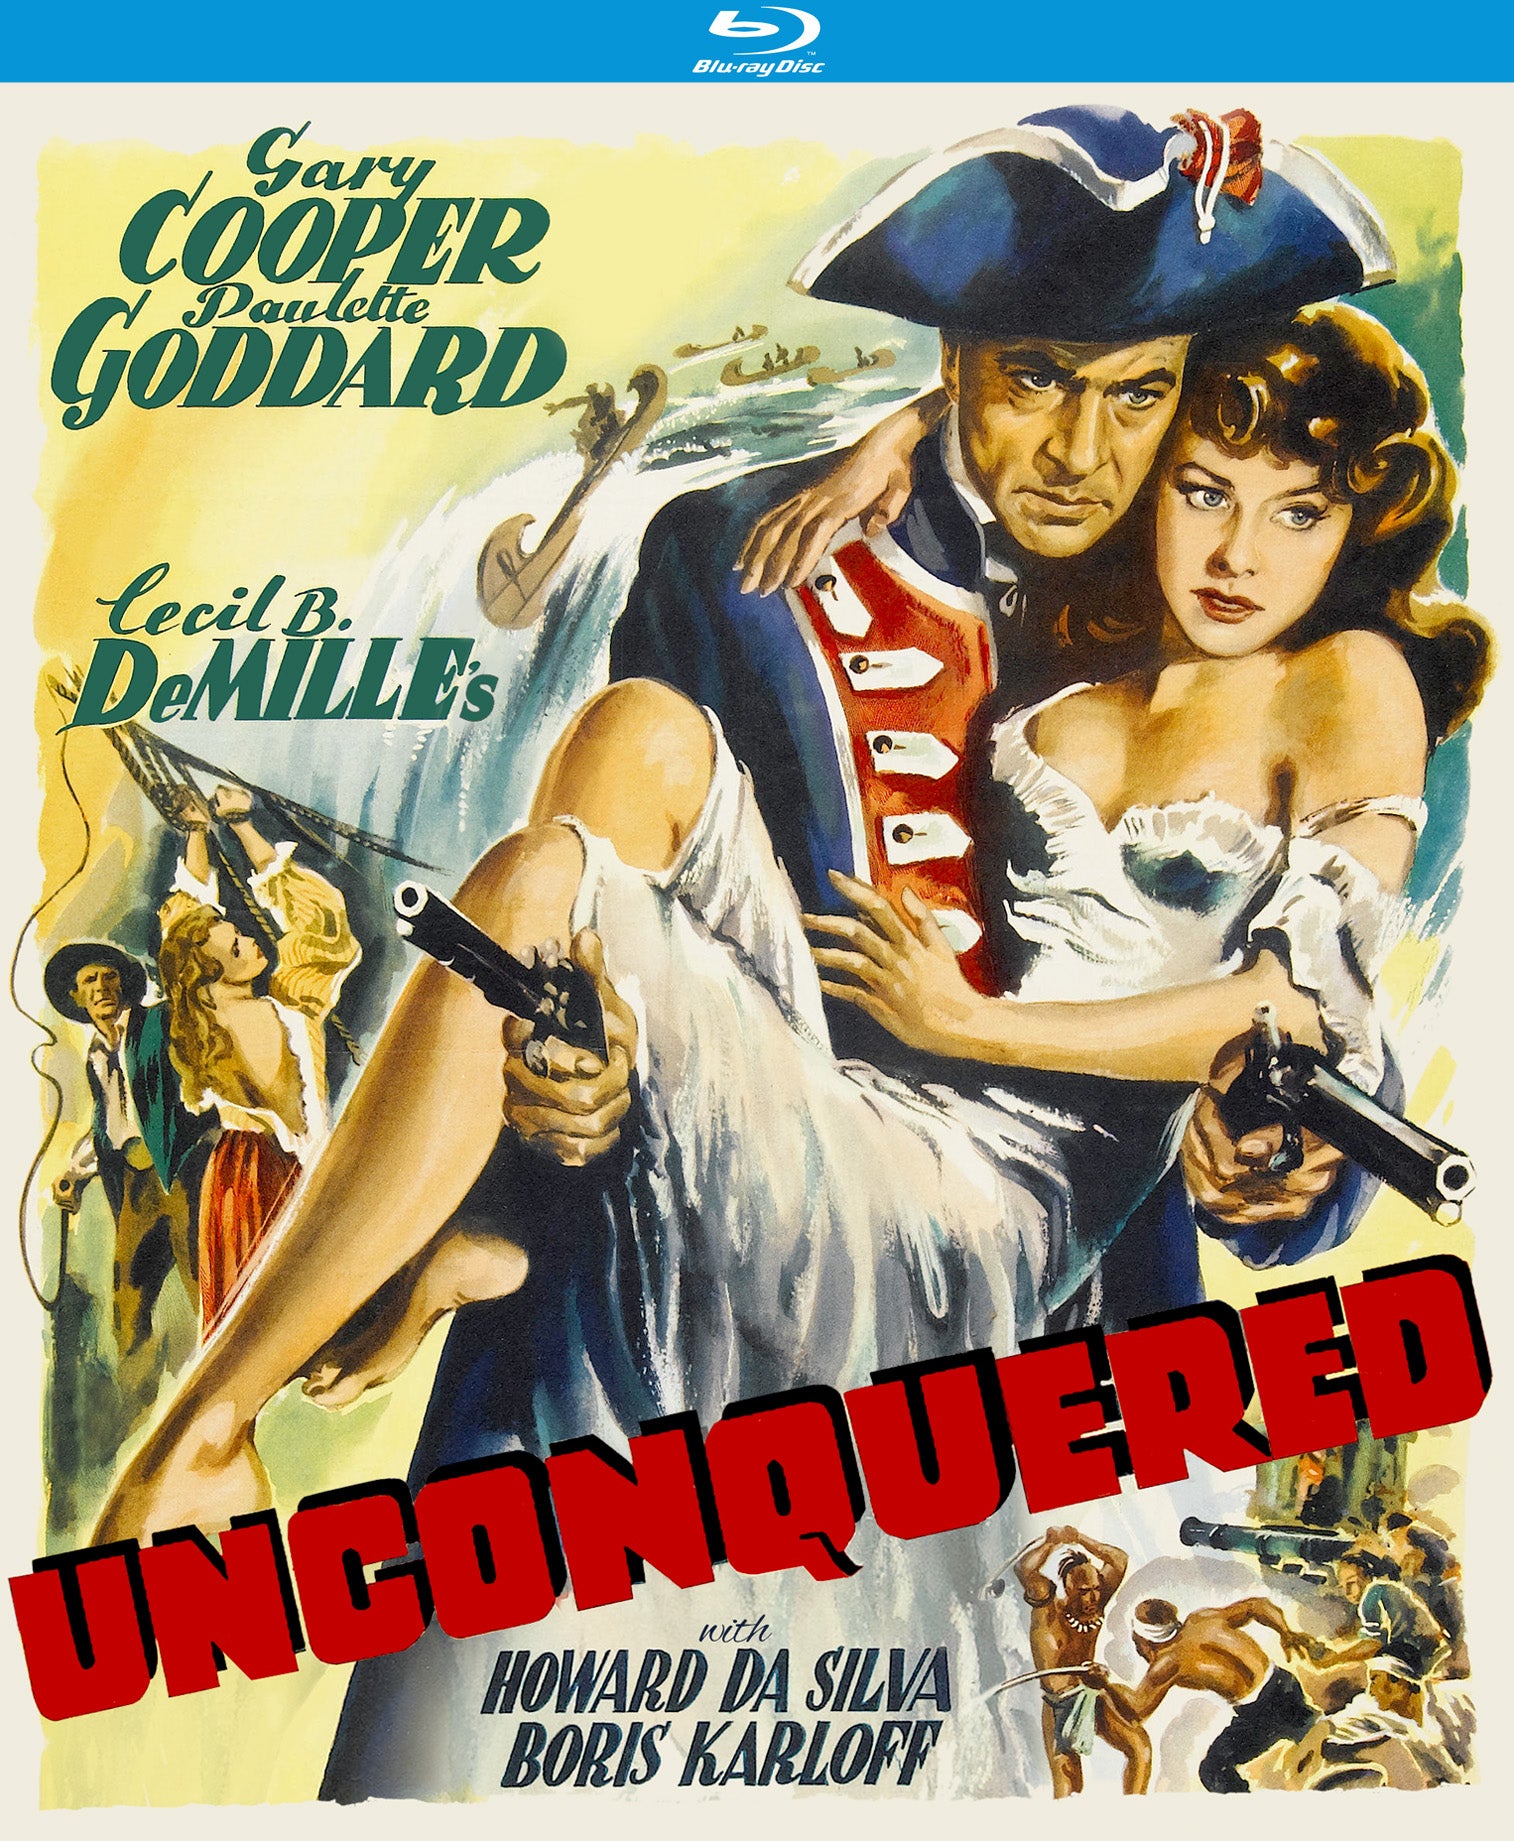 Unconquered [Blu-ray] cover art